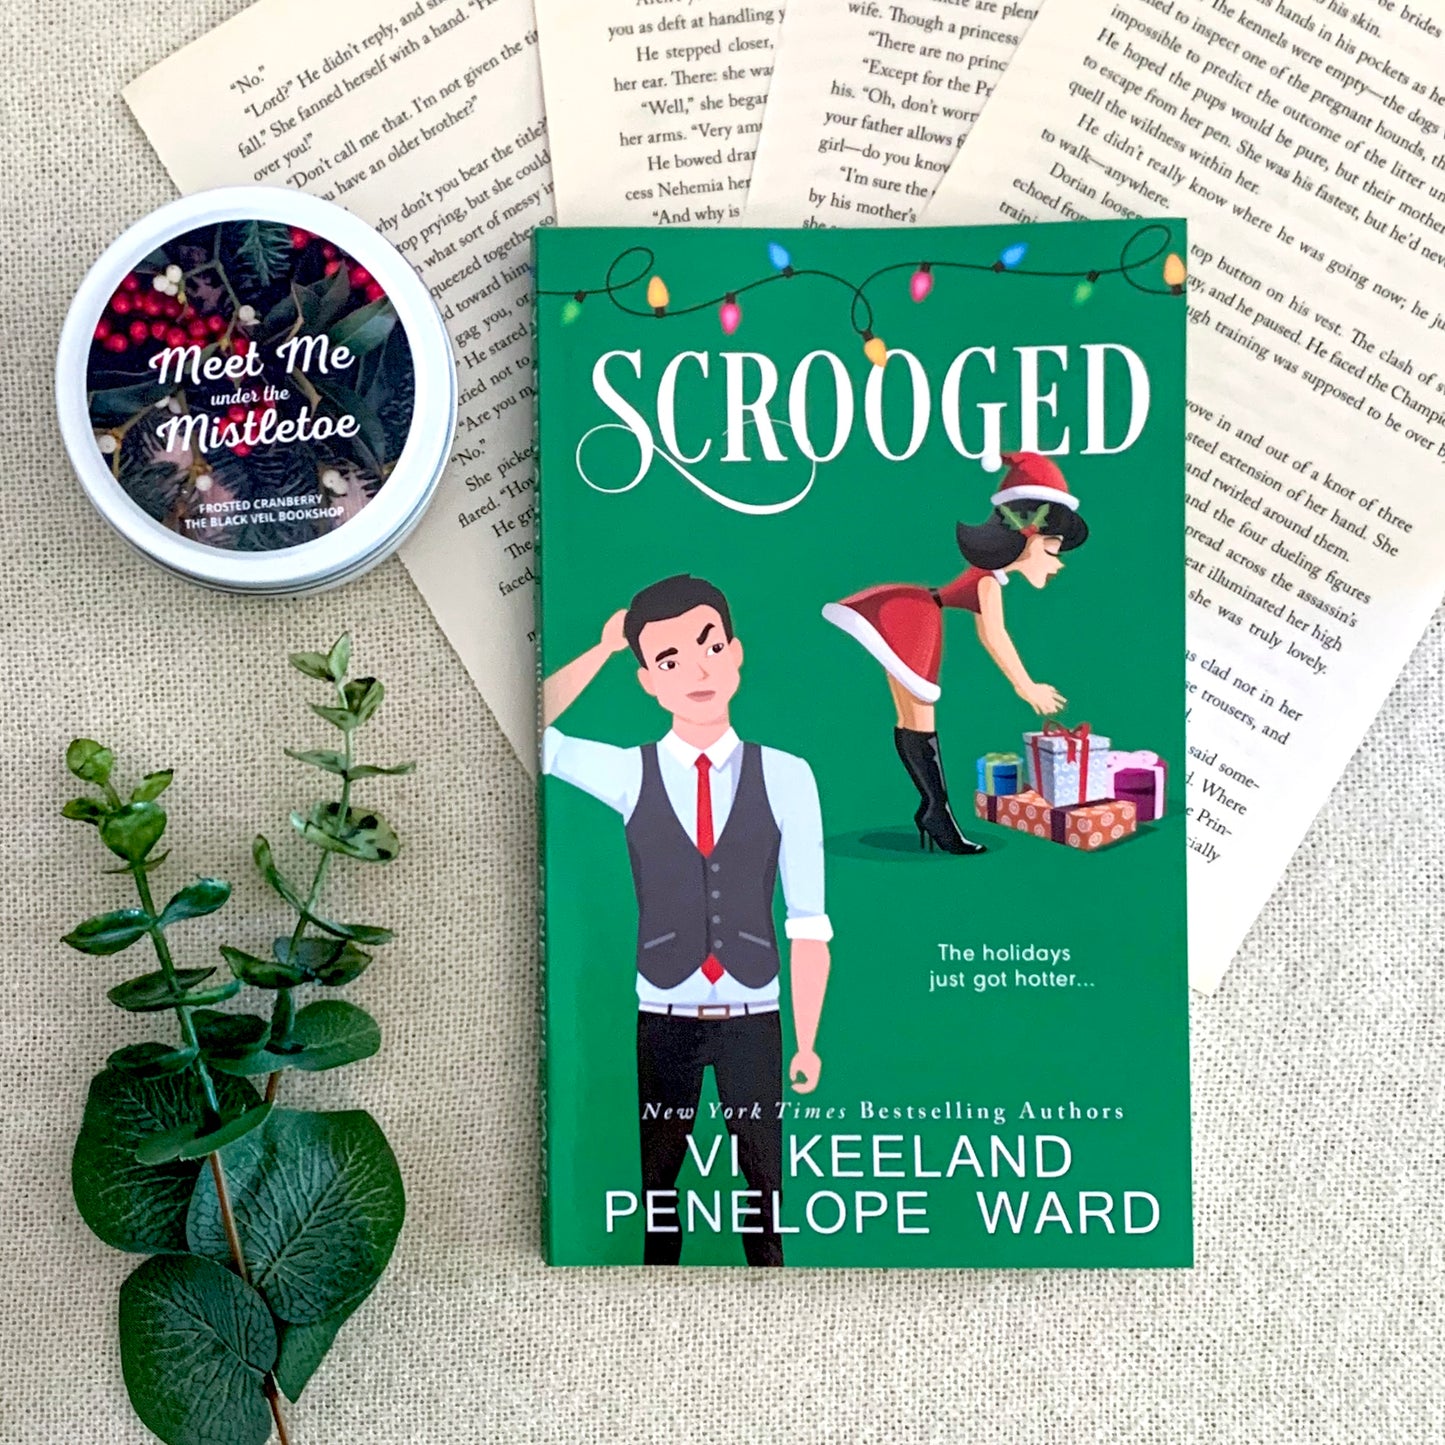 Scrooged by Vi Keeland and Penelope Ward